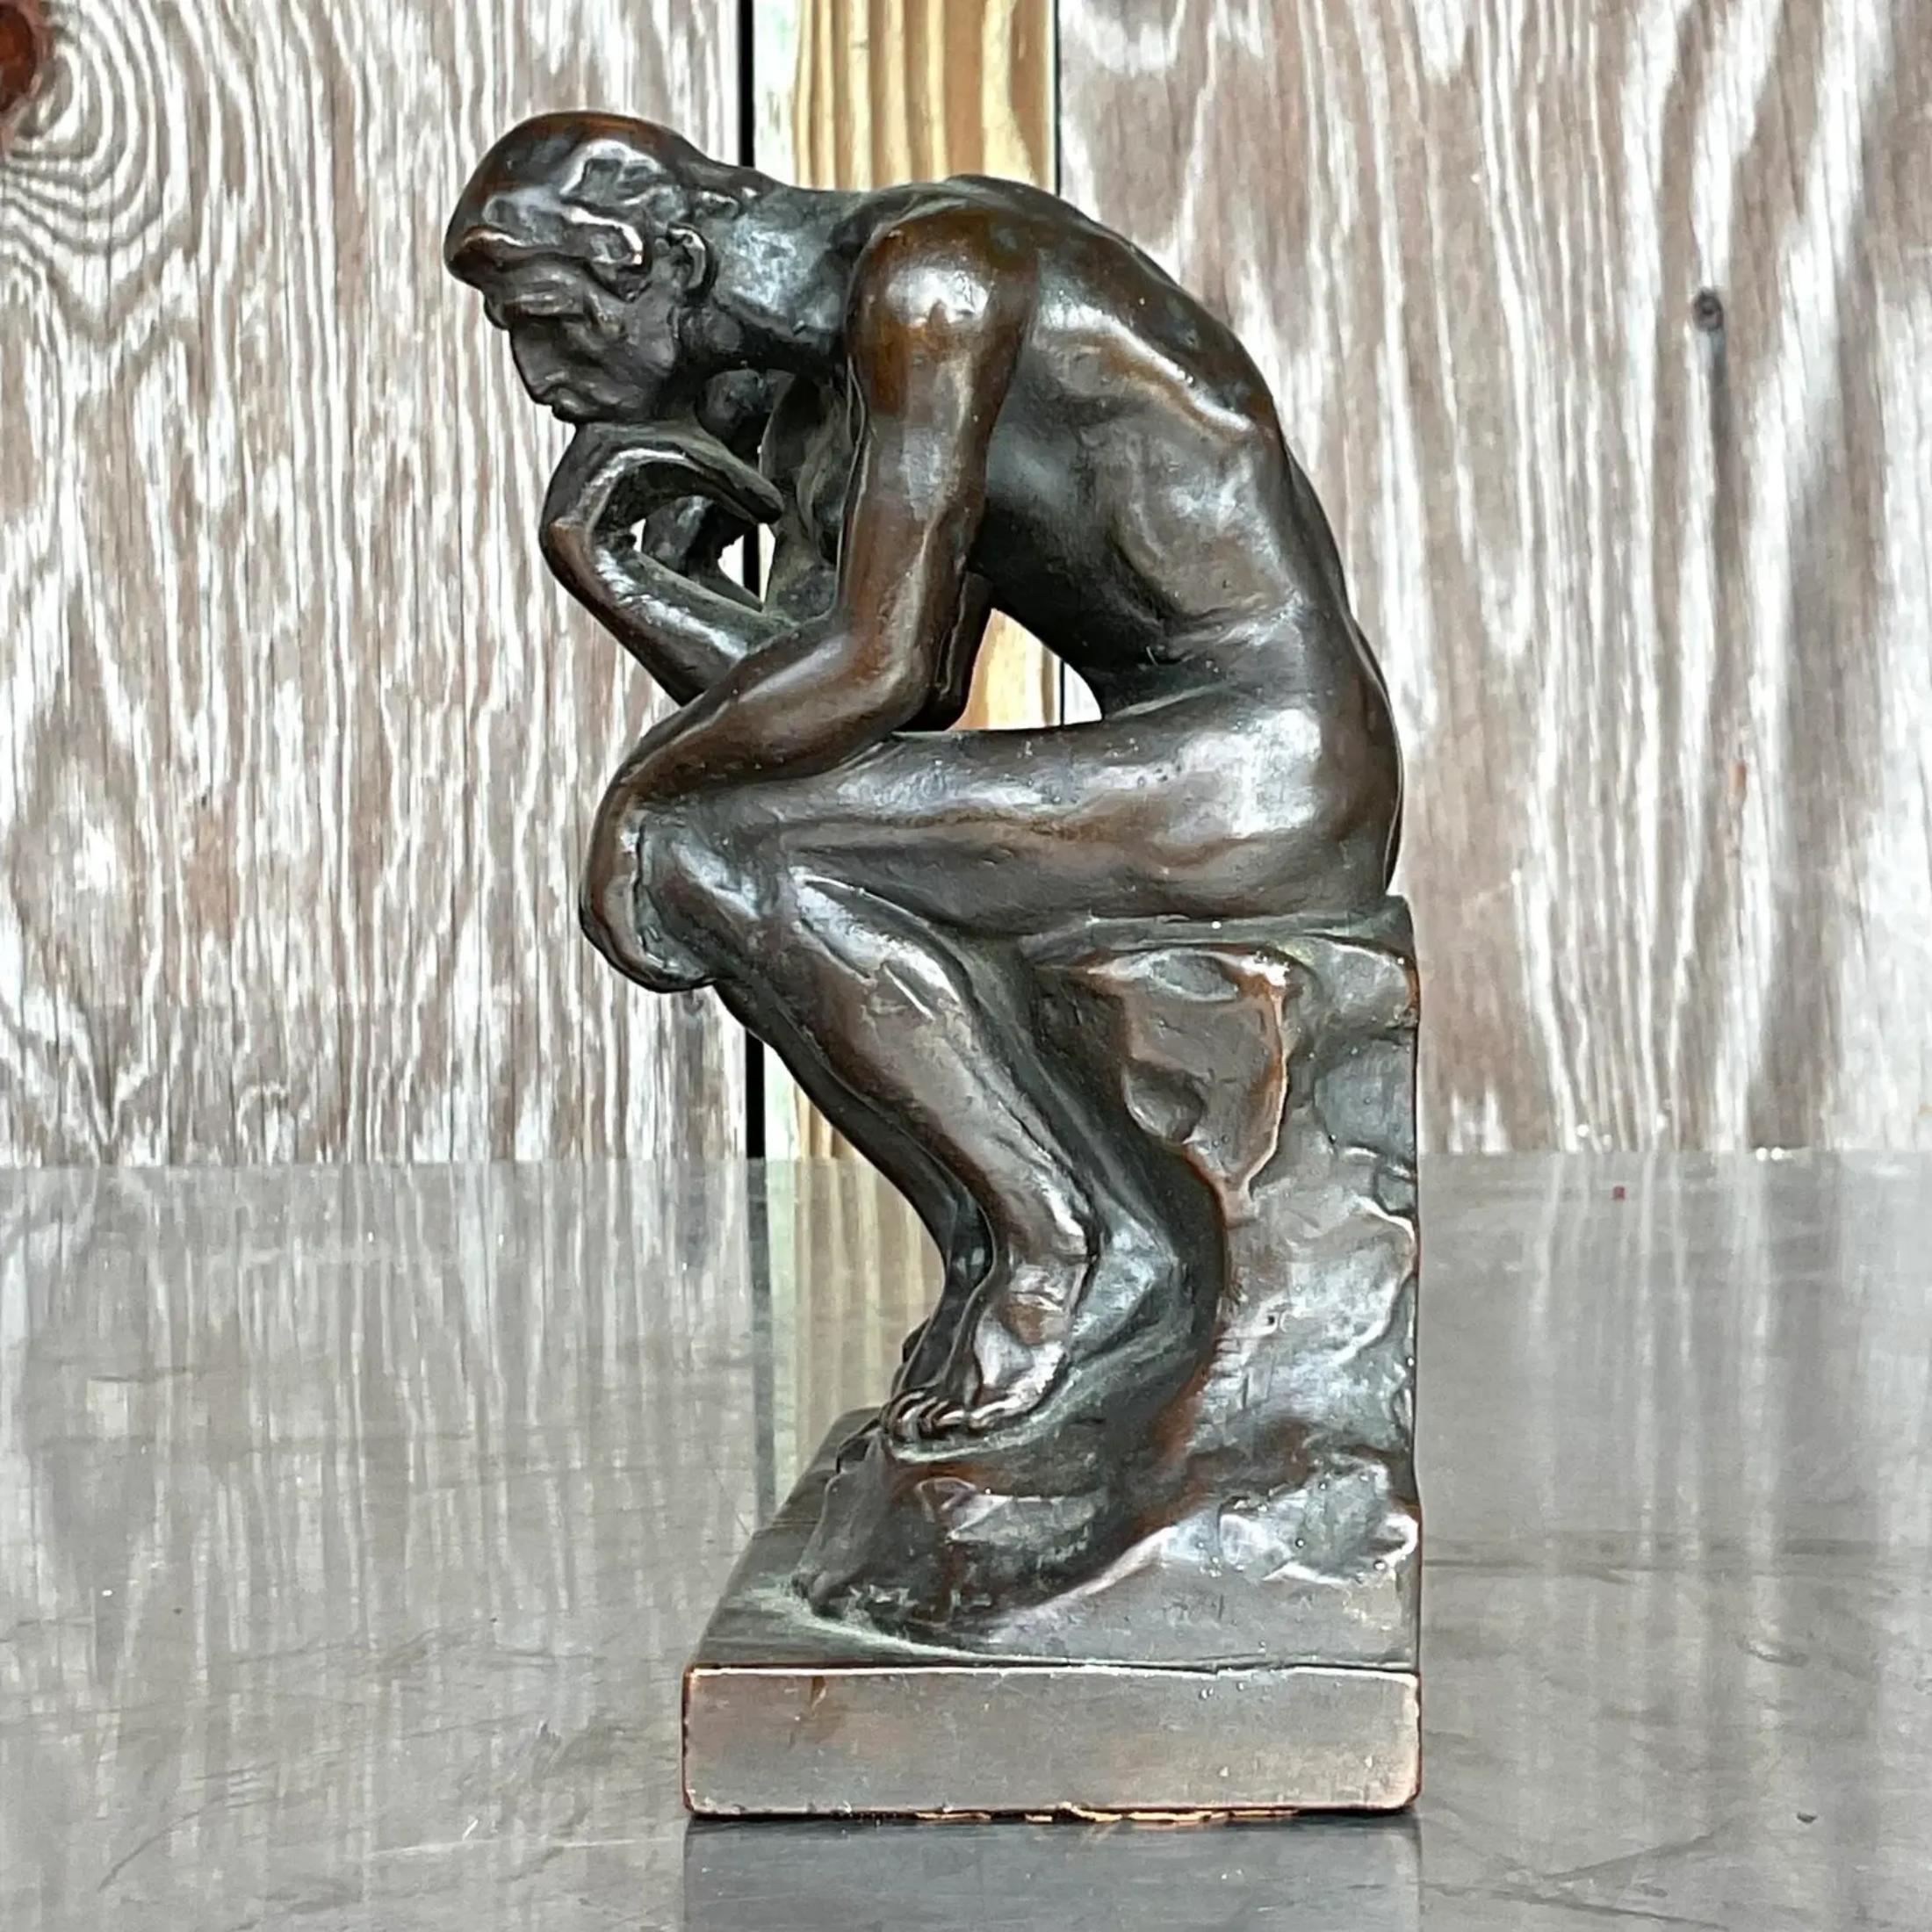 20th Century Vintage Regency Patinated Plaster Agusta Rodin “The Thinker” Bookends - a Pair For Sale